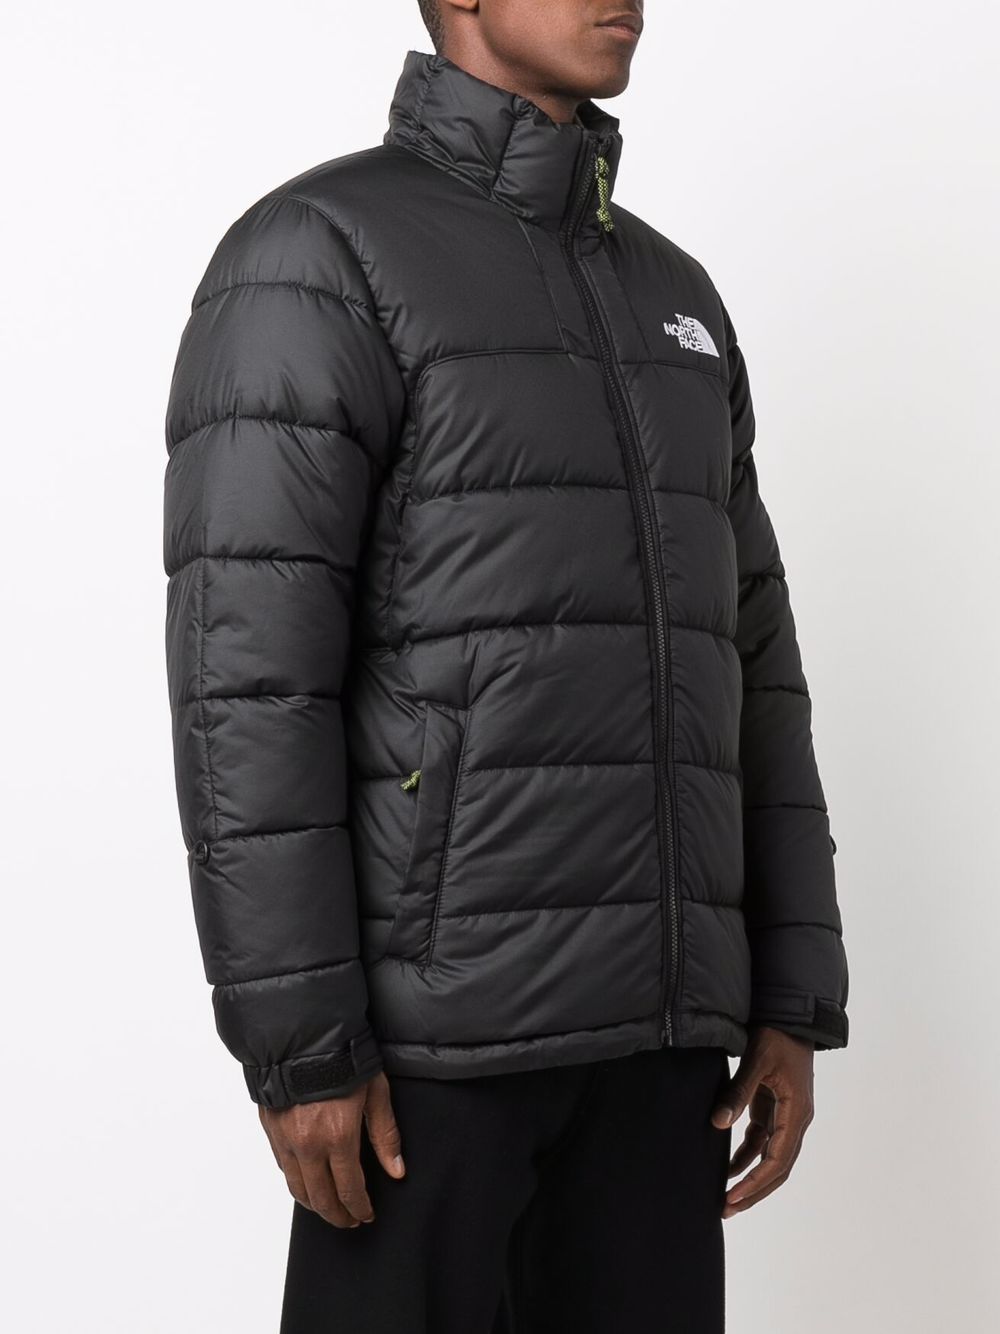 North face animal print puffer jacket Archives - STYLE DU MONDE